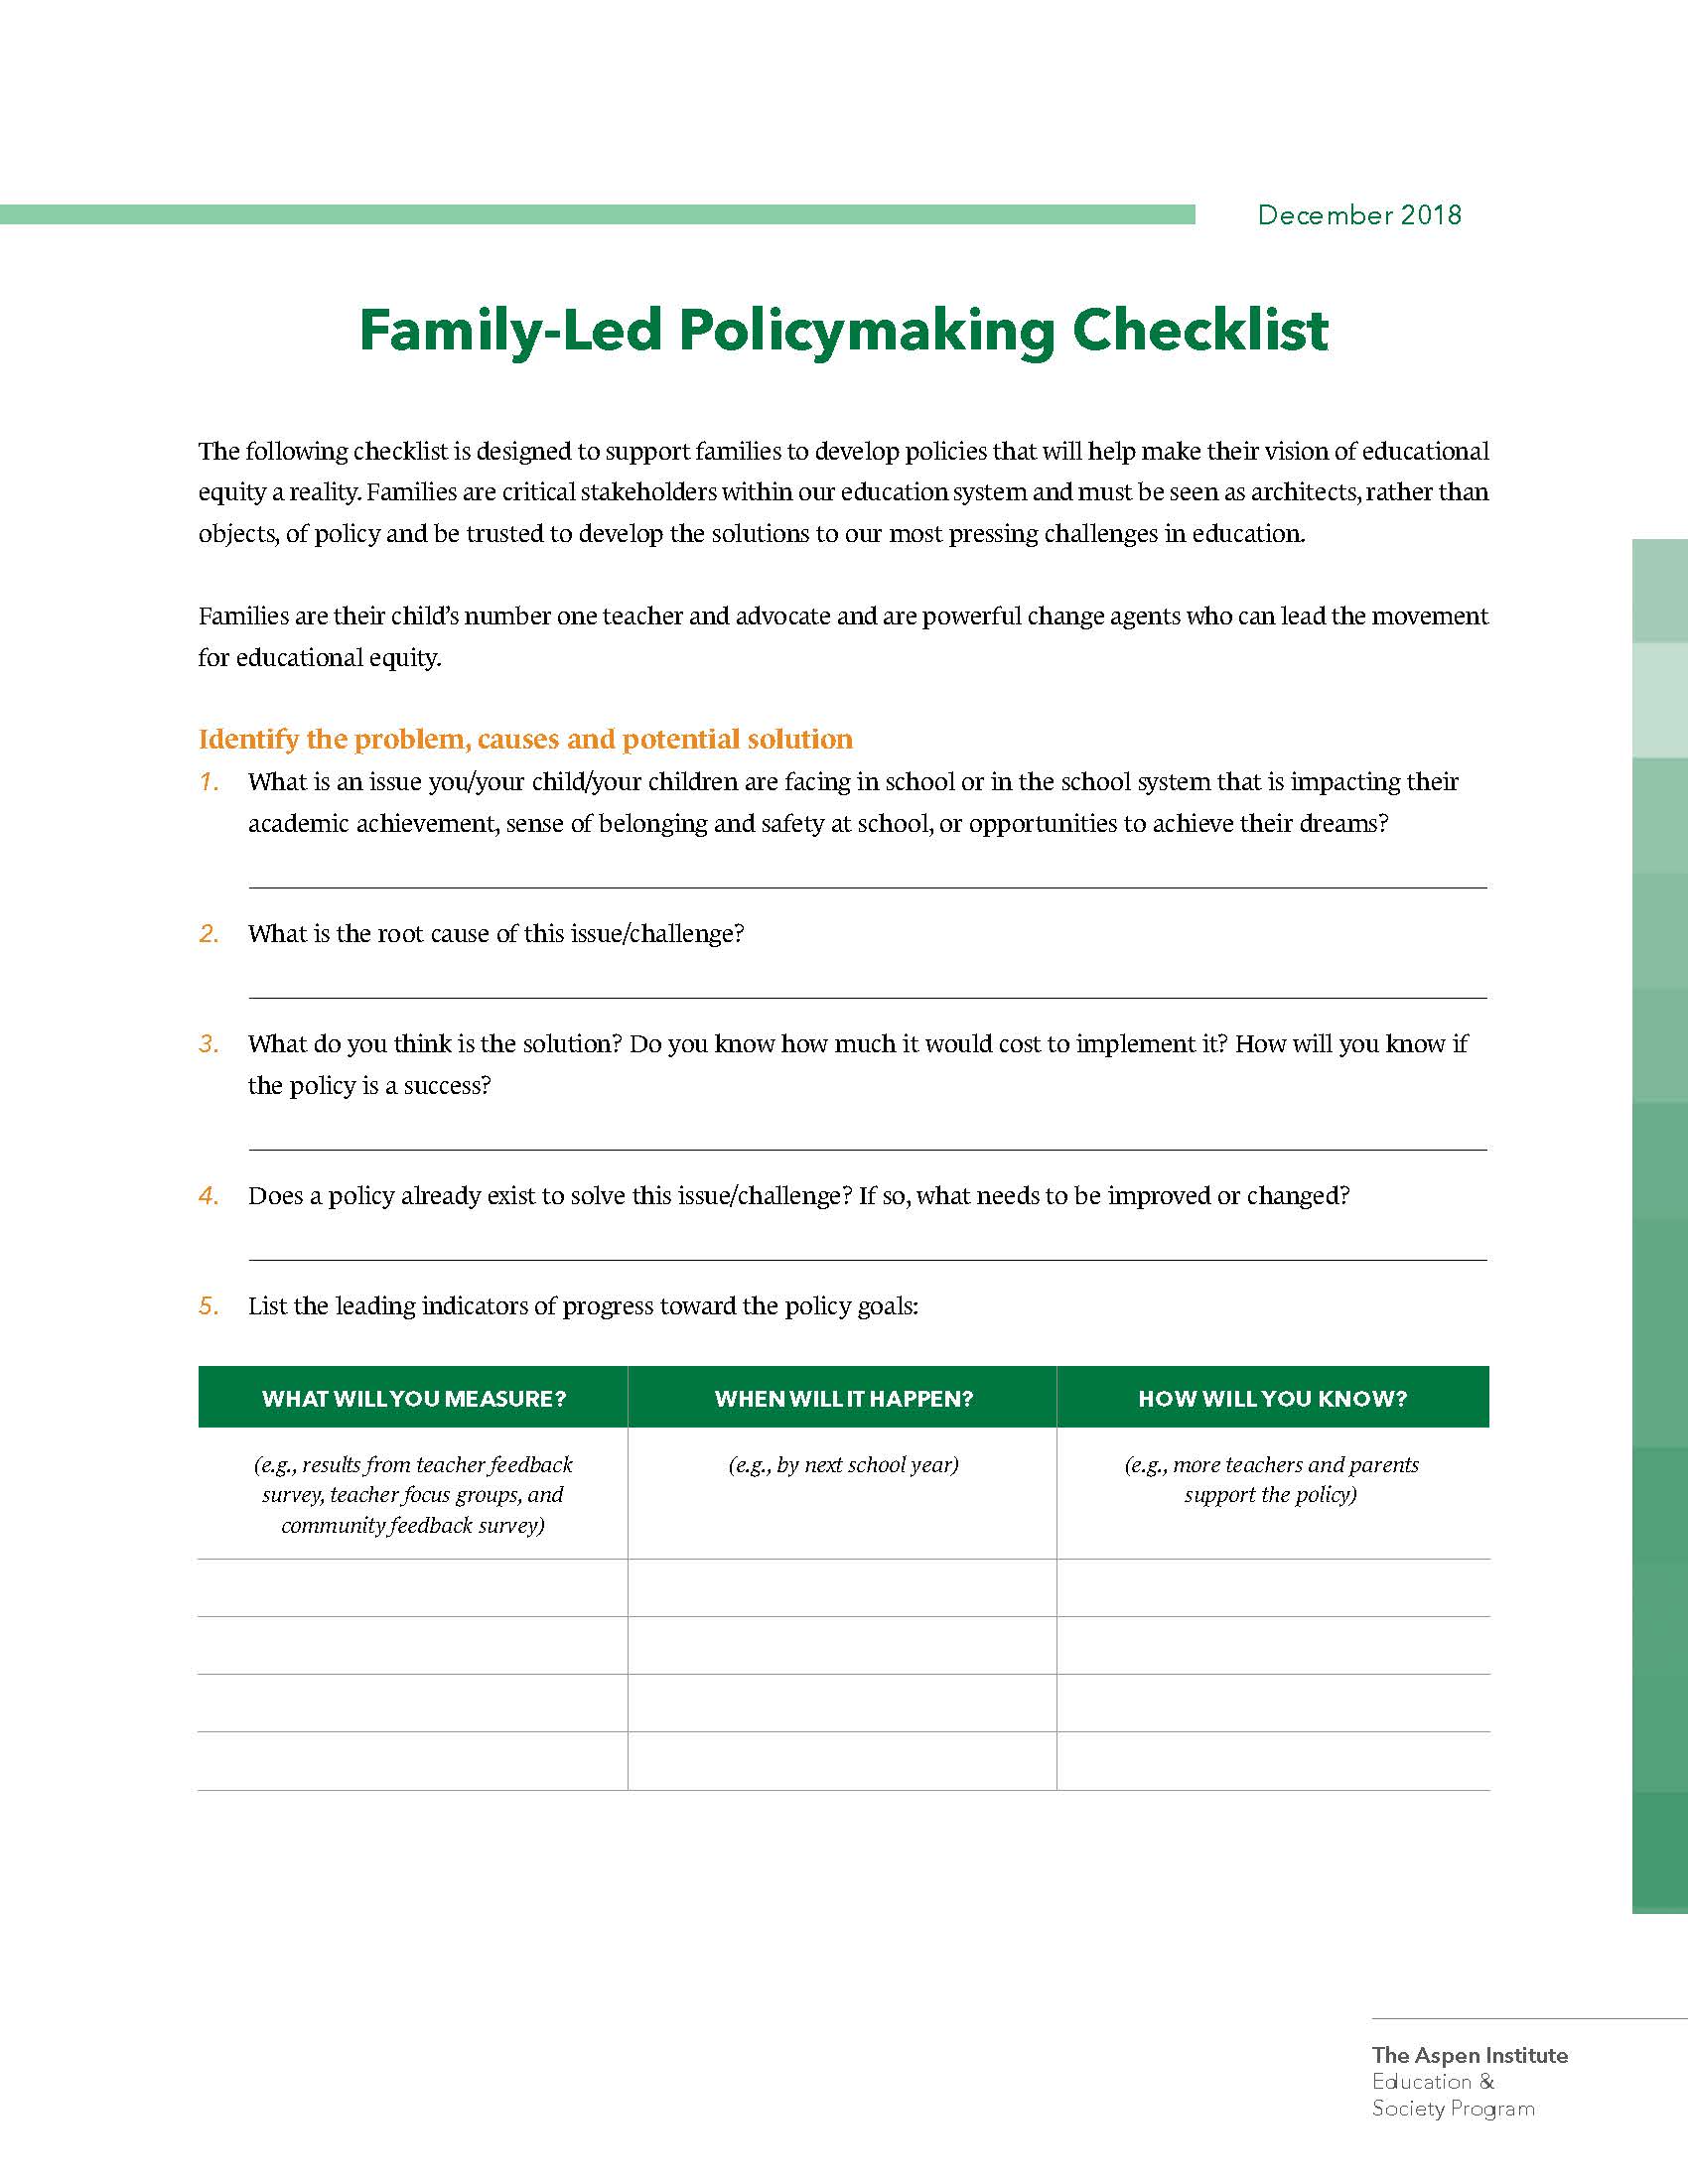 Family-Led Policymaking Checklist_Page_1